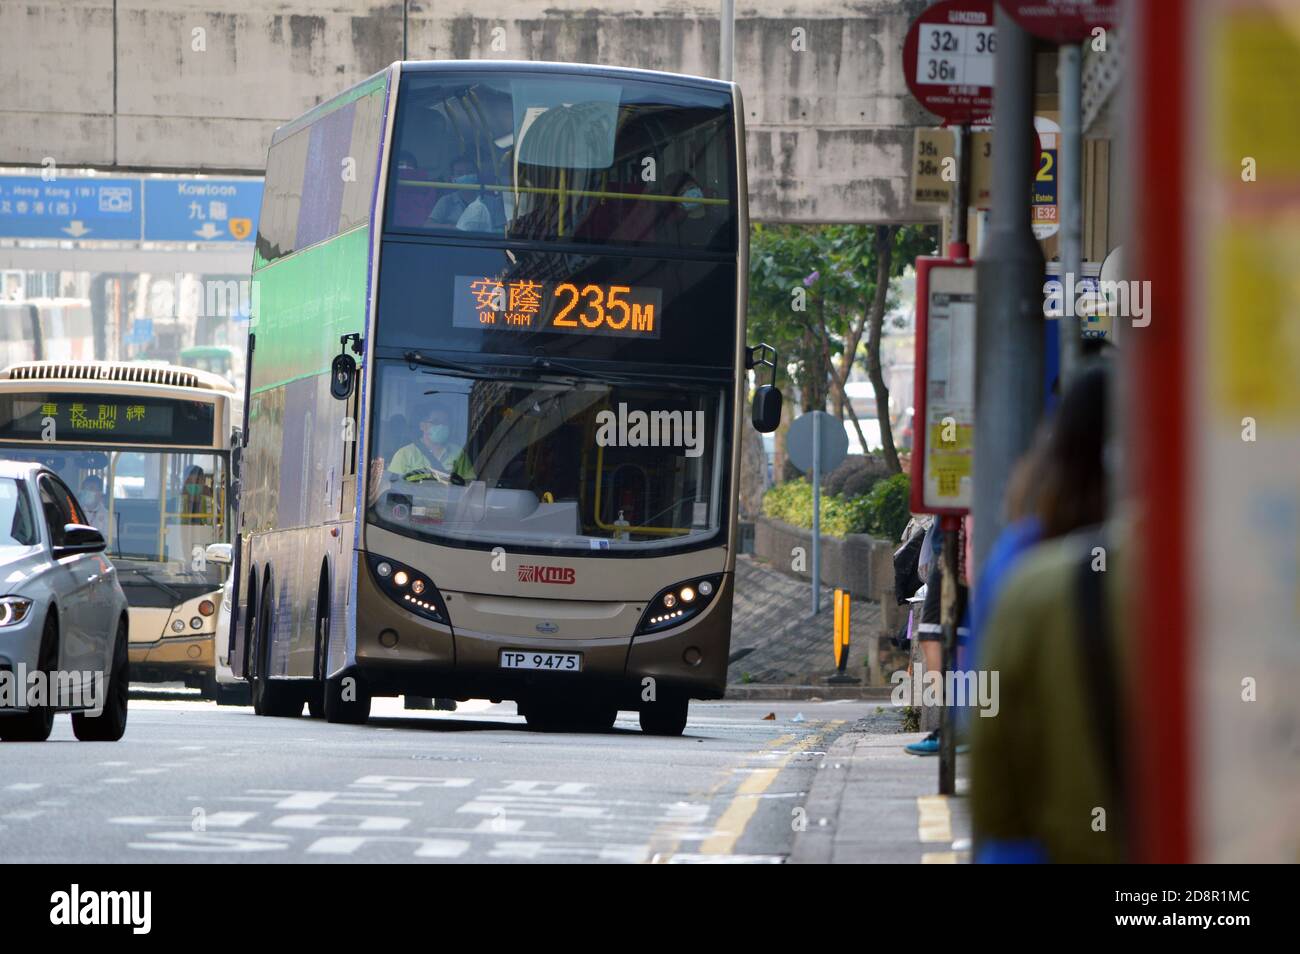 Kowloon Motor Bus (KMB) route 235M bus approaching a bus stop on Kwai Chung Road in Kwai Chung, Hong Kong Stock Photo